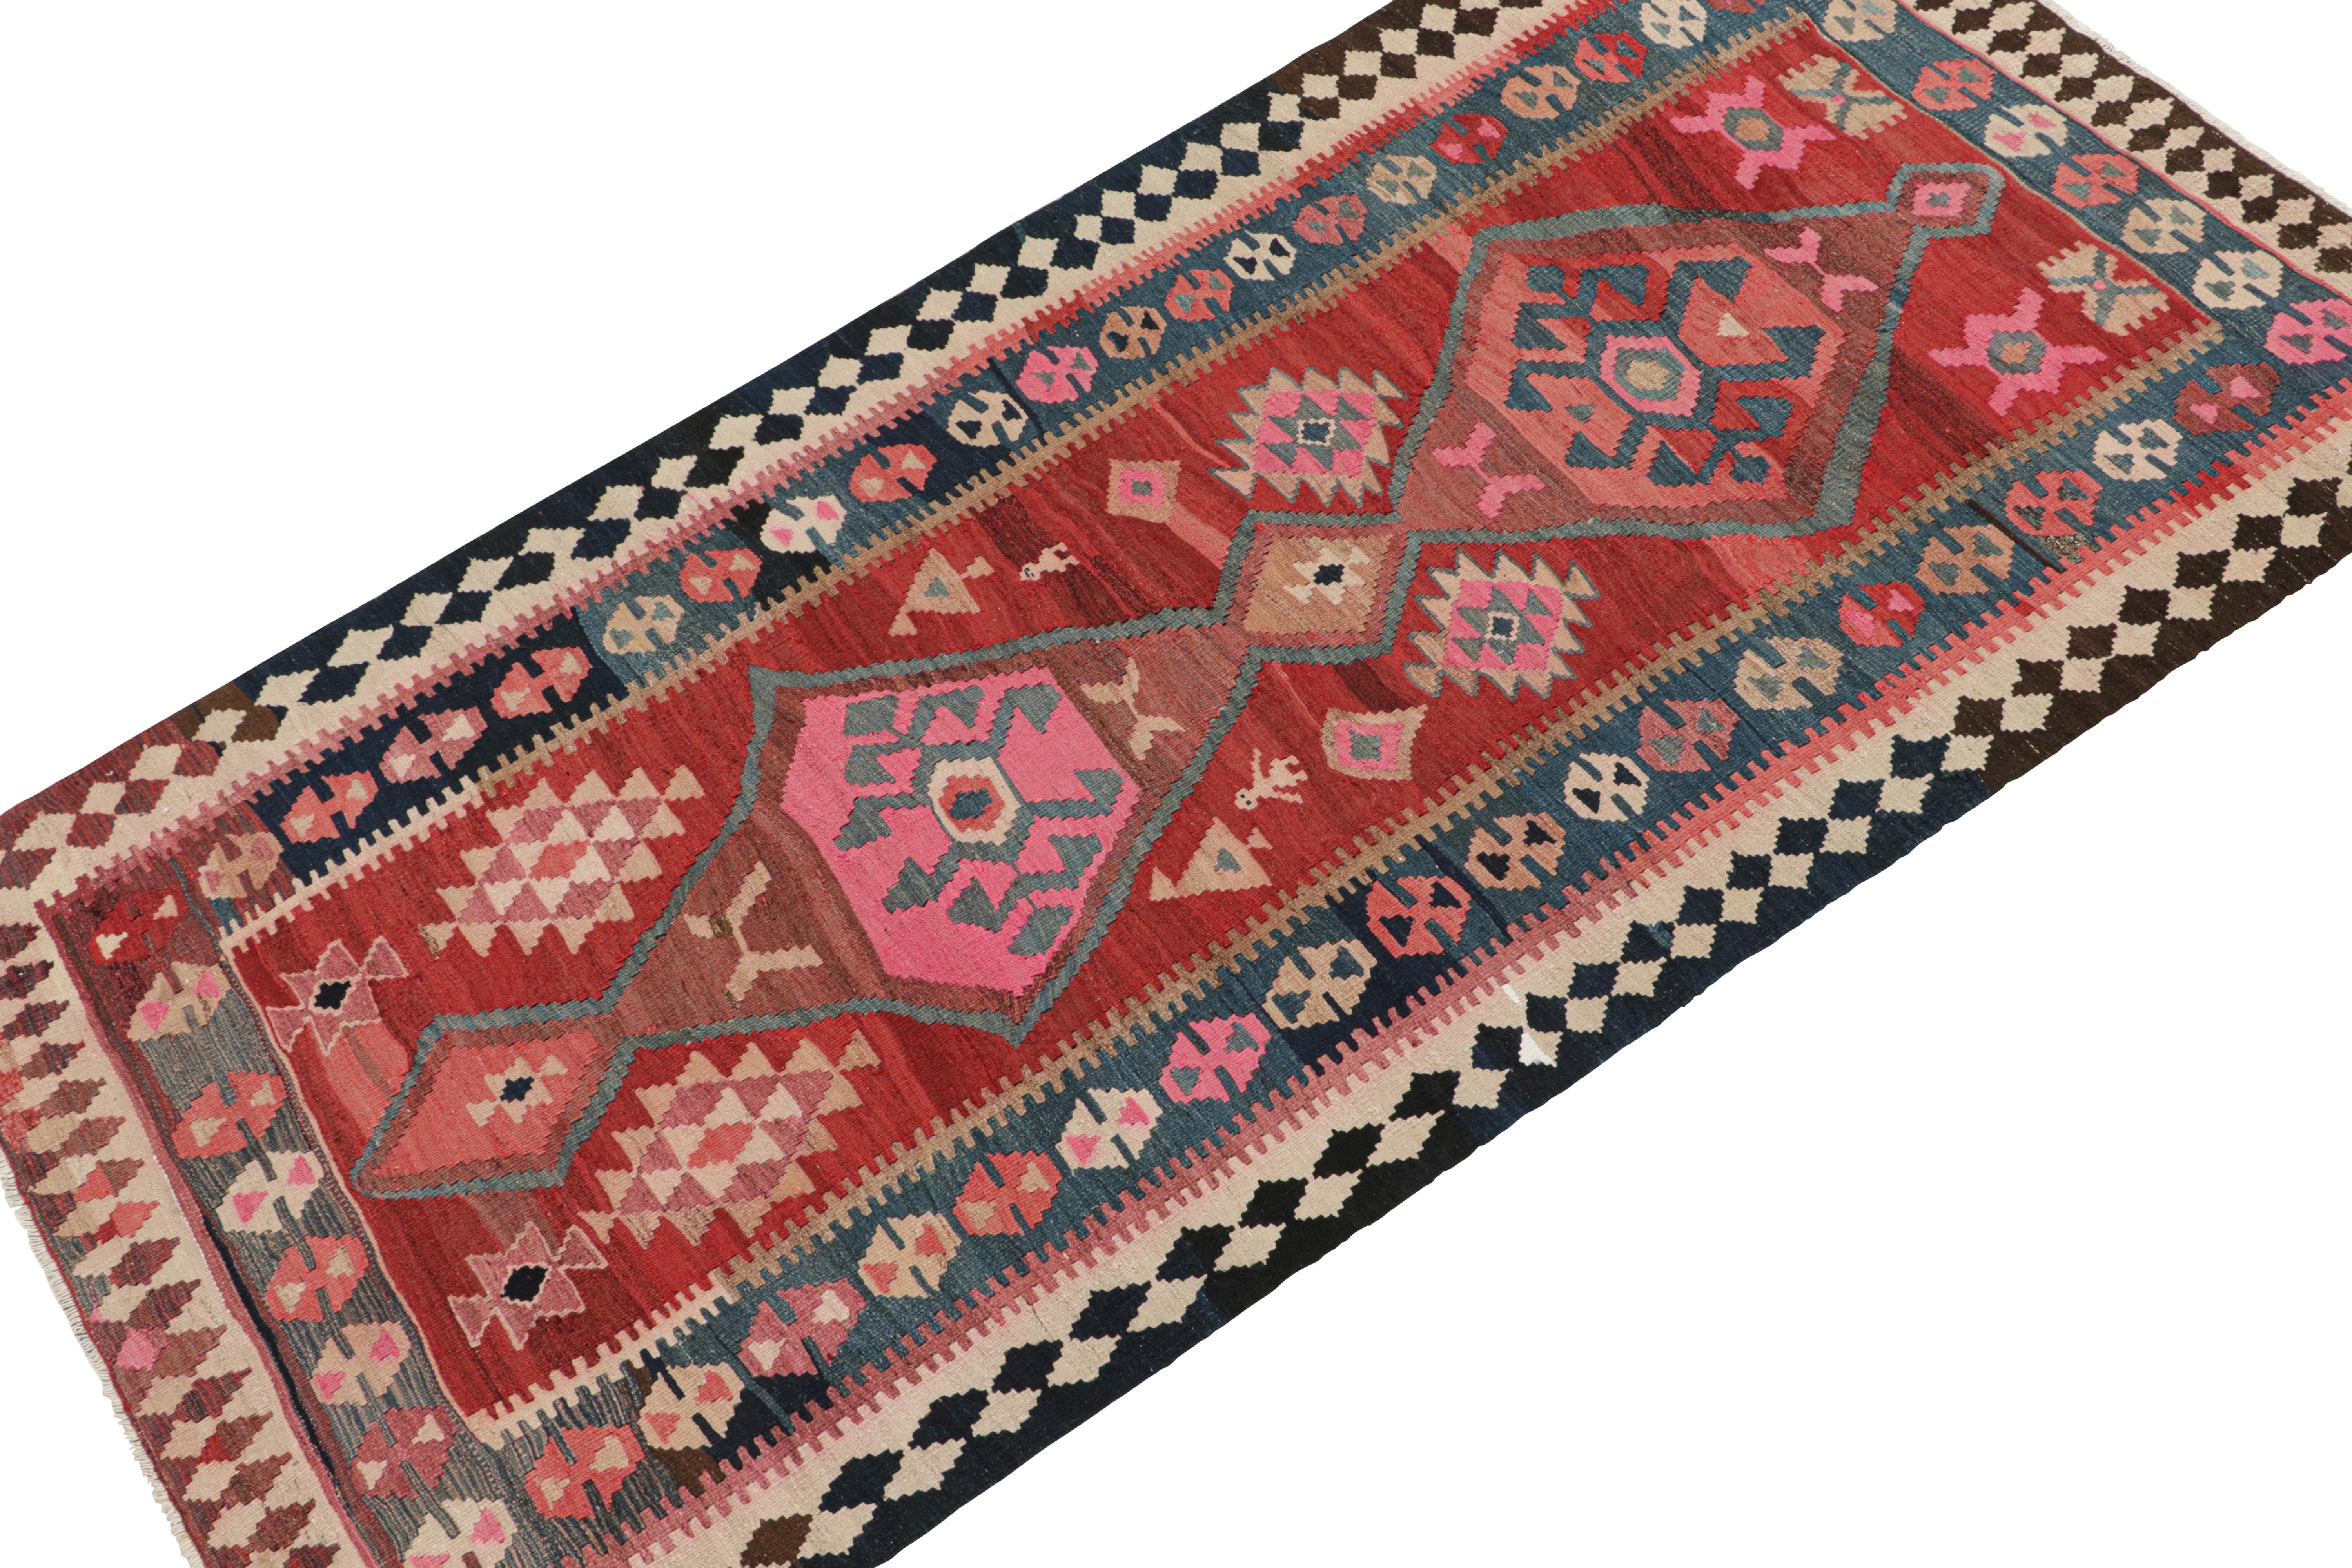 Vintage Shahsavan Persian Kilim in Red, Blue & Pink Patterns In Good Condition For Sale In Long Island City, NY